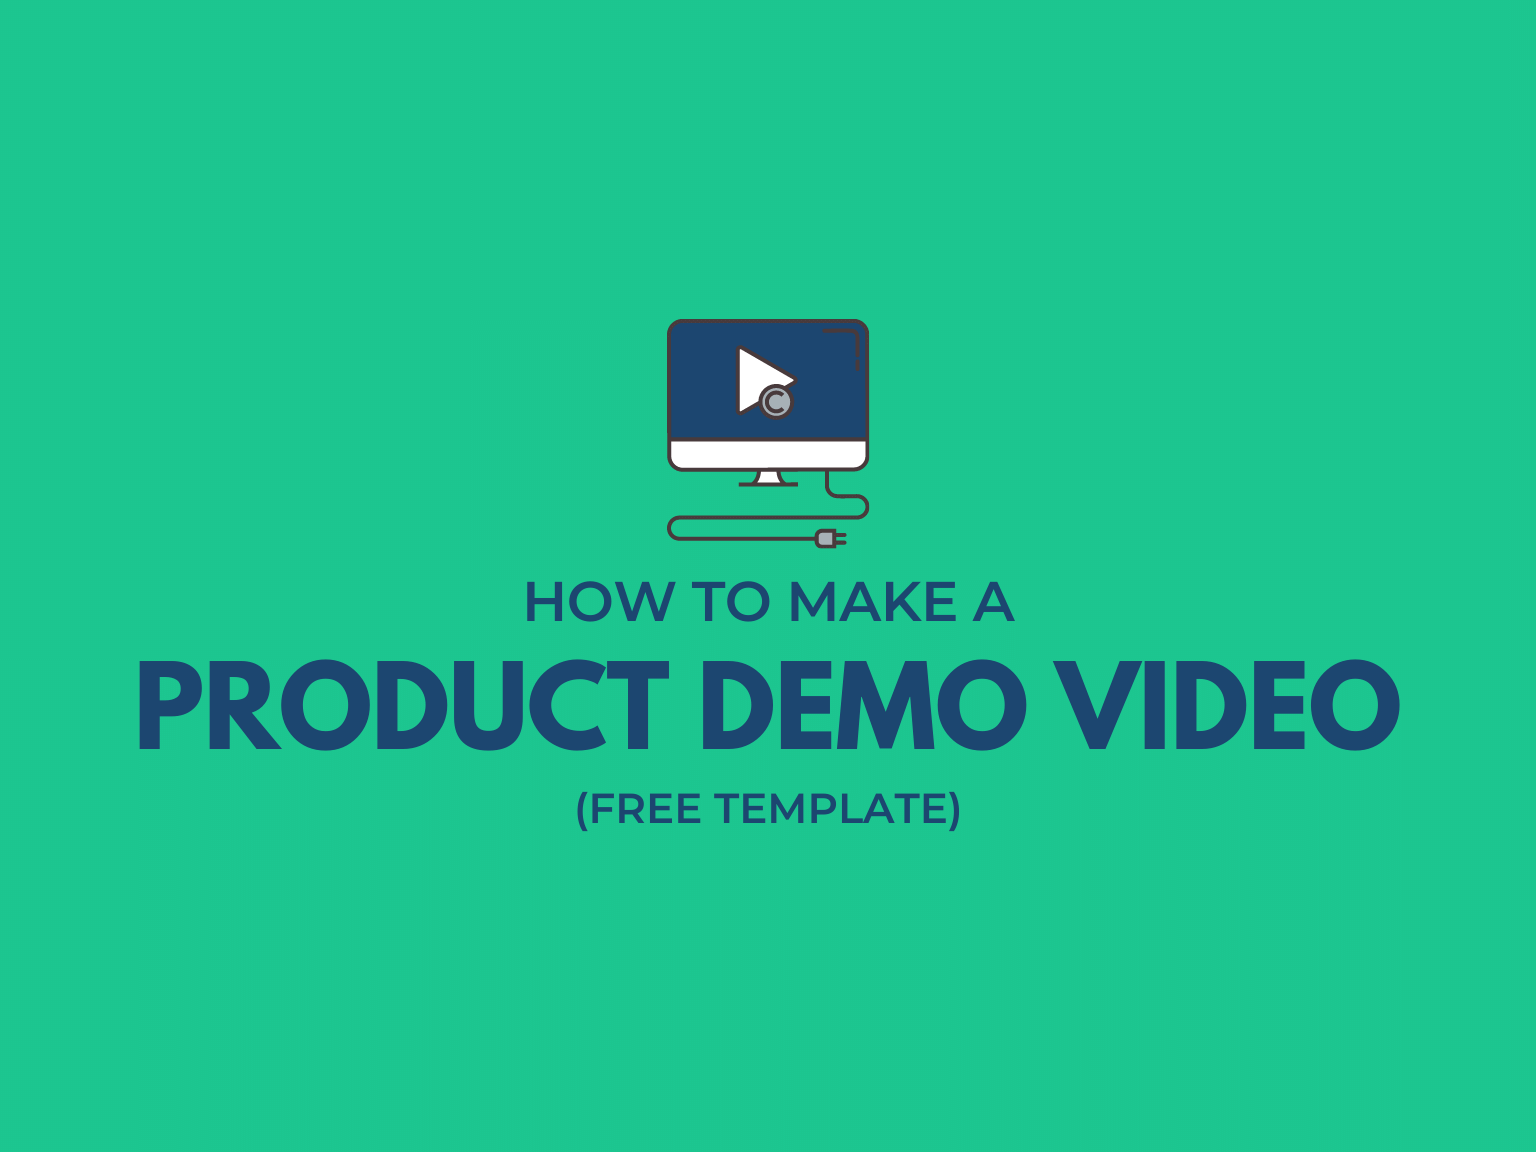 How to Make a Product Demo Video (Free Template) | The TechSmith Blog